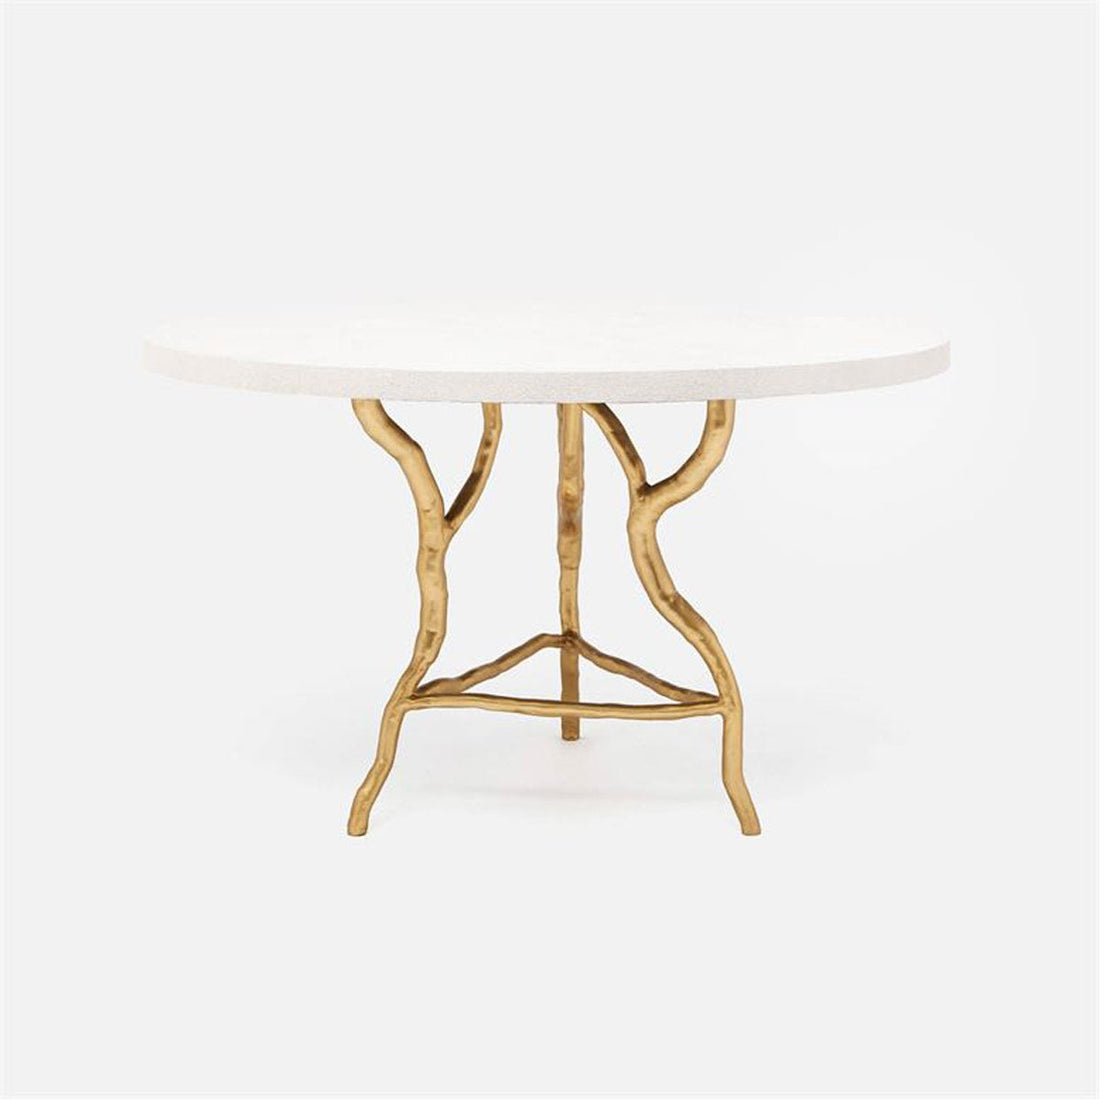 Made Goods Royce Abstract Branch Round Dining Table in Faux Shagreen Top